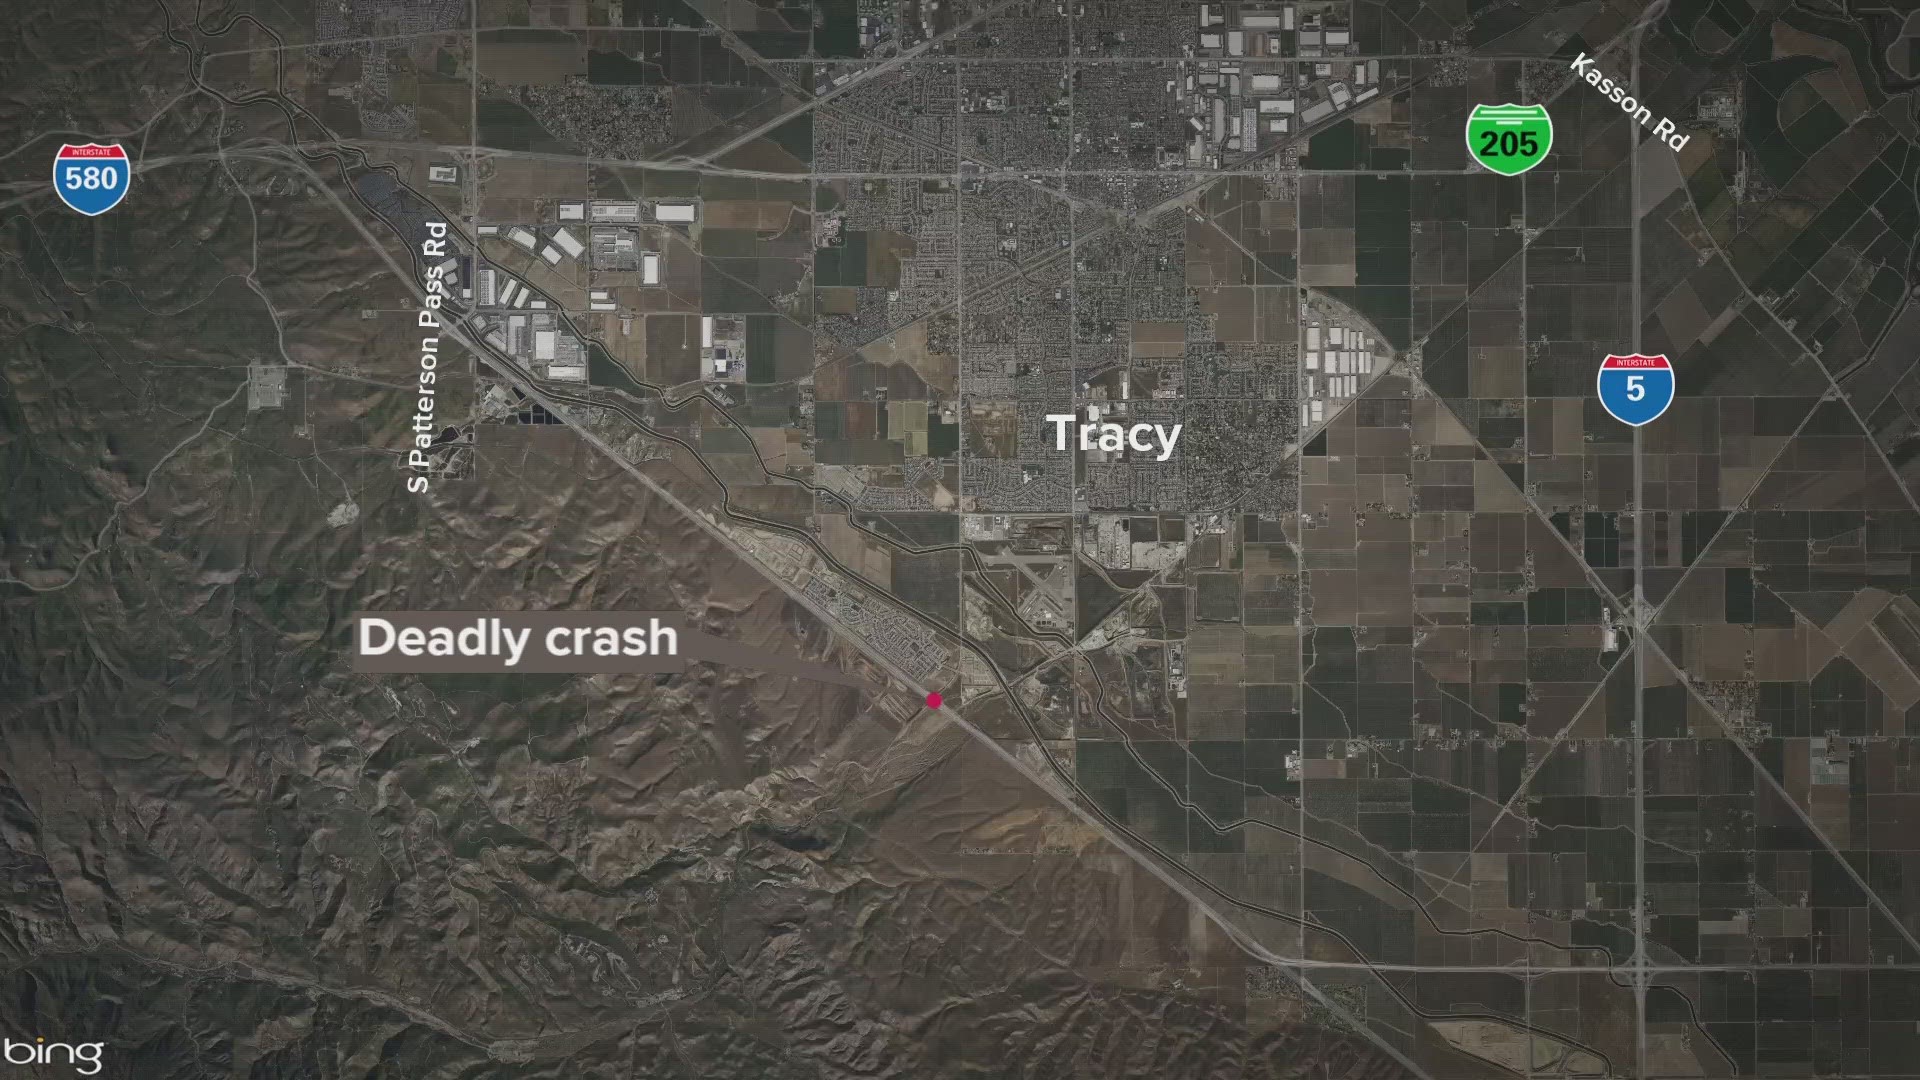 A two-month-old baby girl died days after a collision with a wrong-way driver in Tracy, police said.